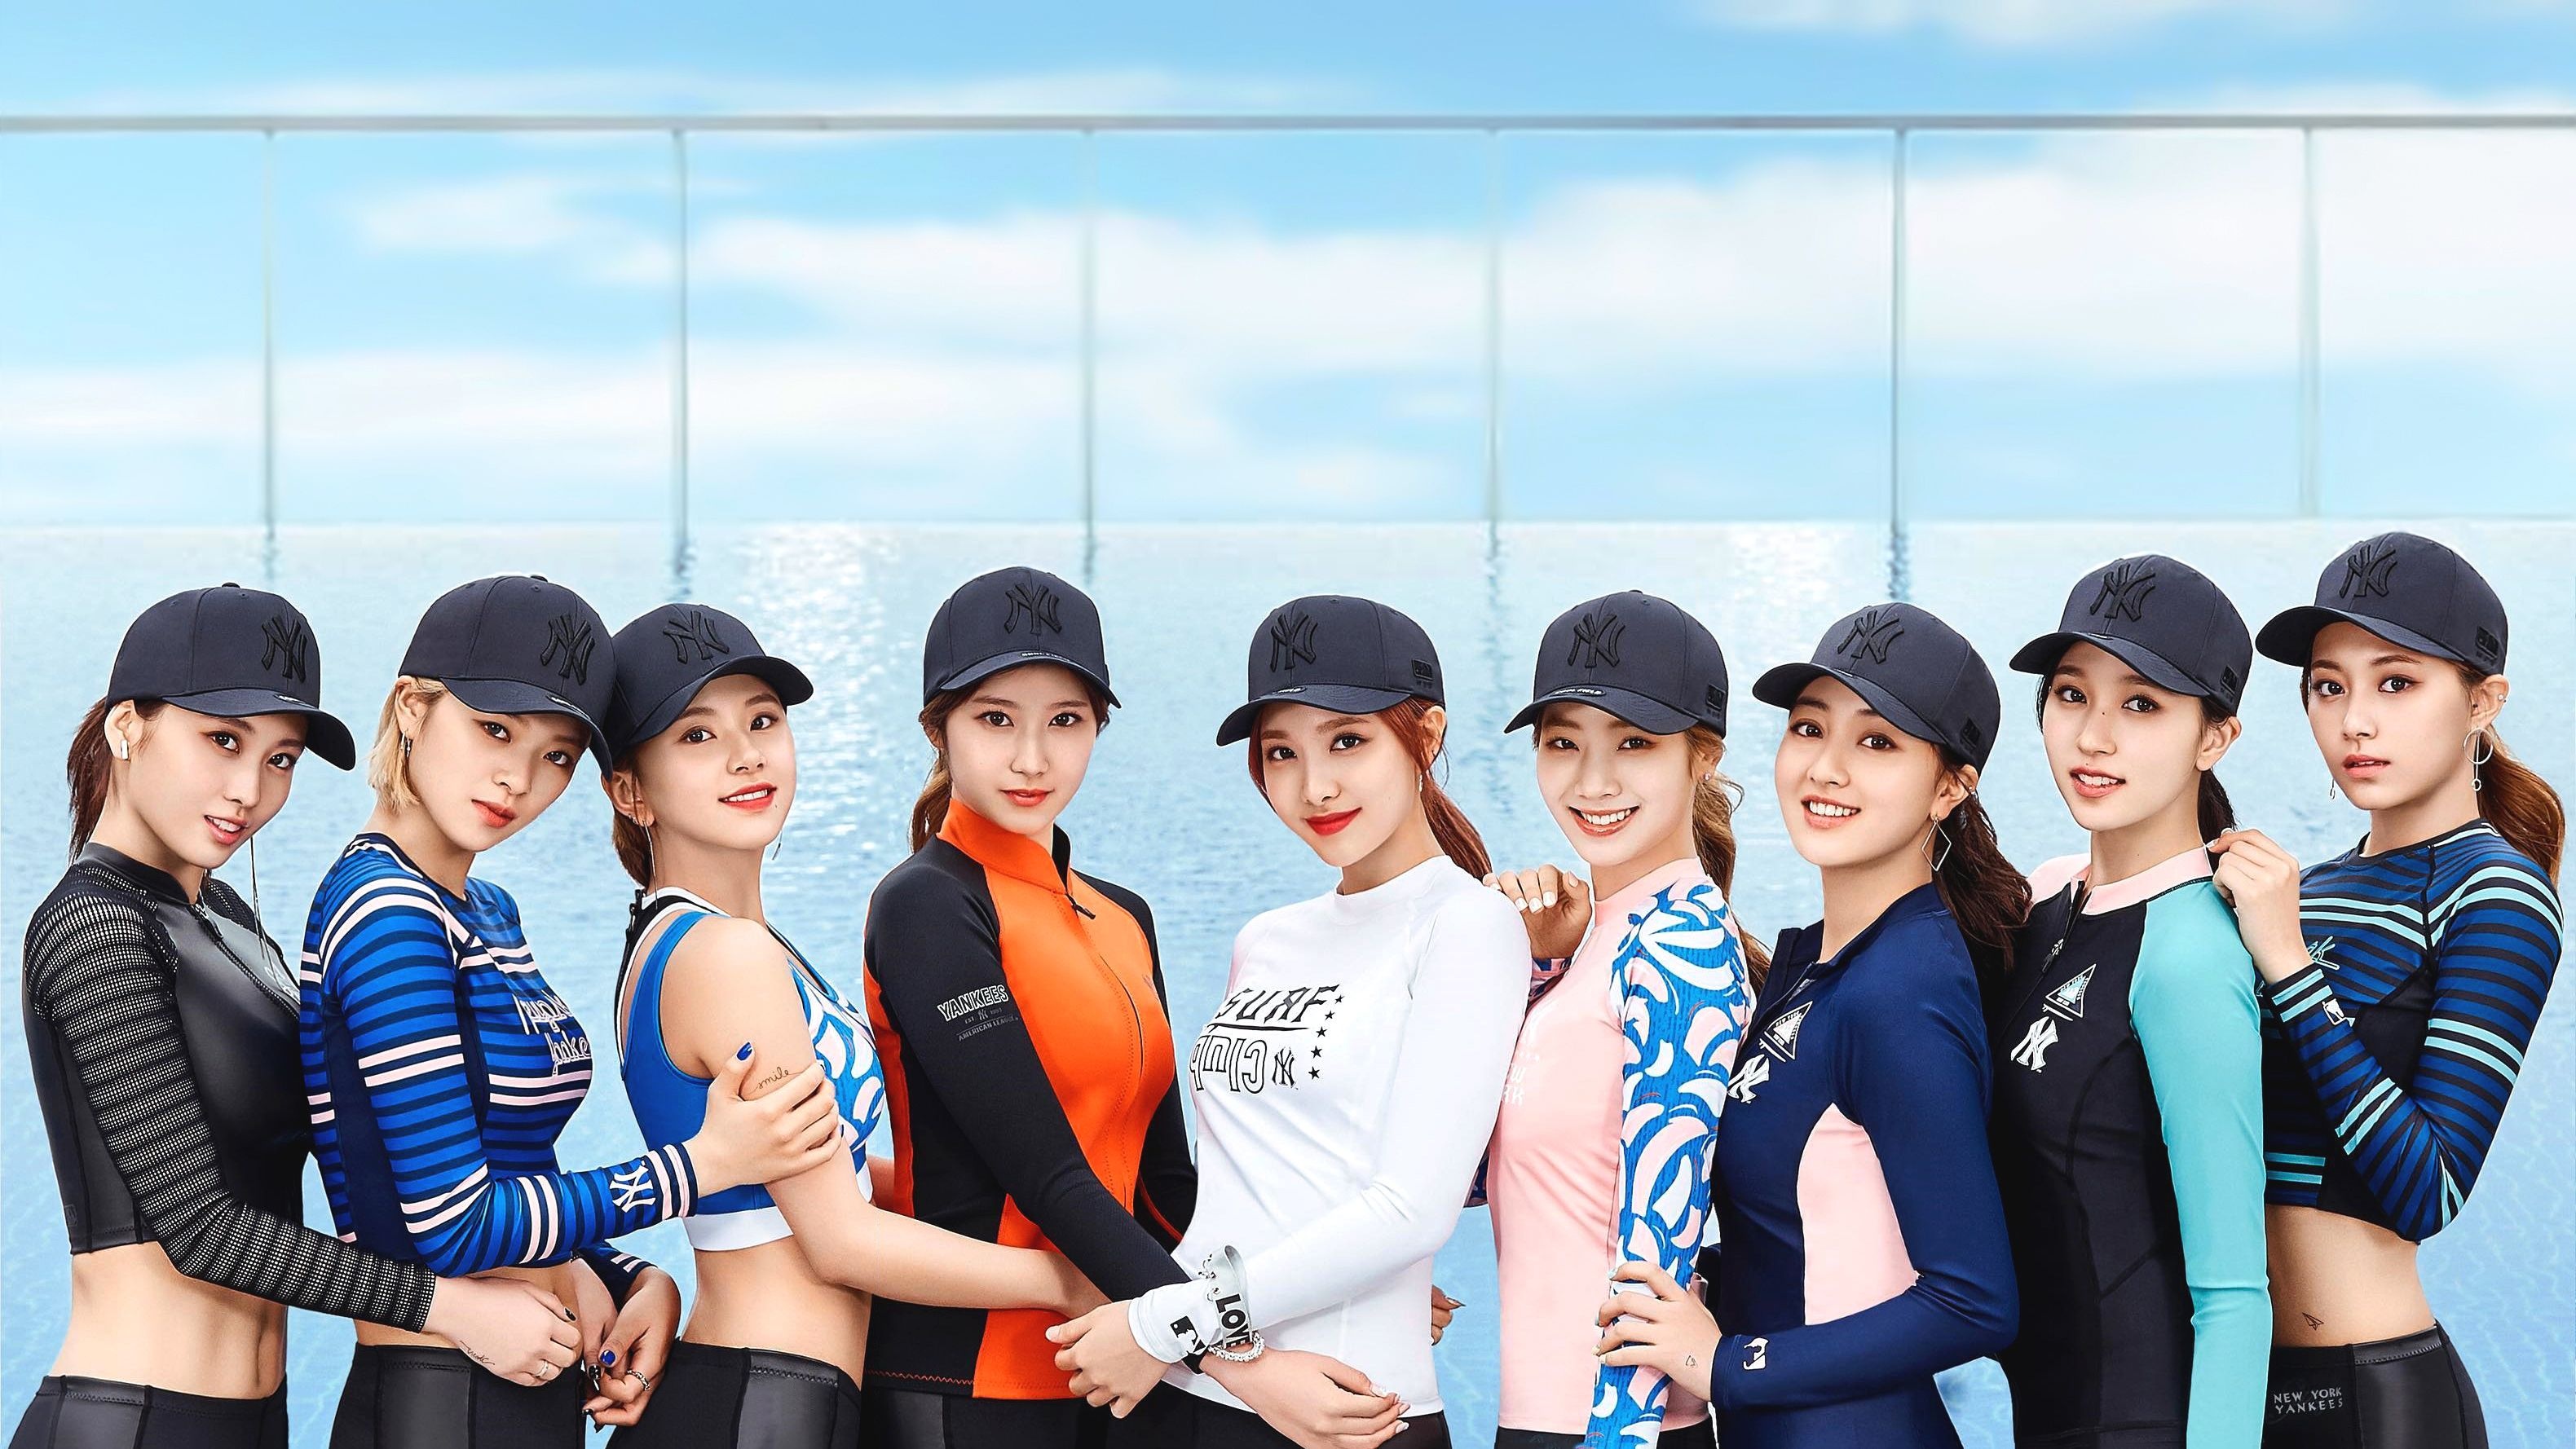 Twice Wallpapers - Top Free Twice Backgrounds 3160x1780